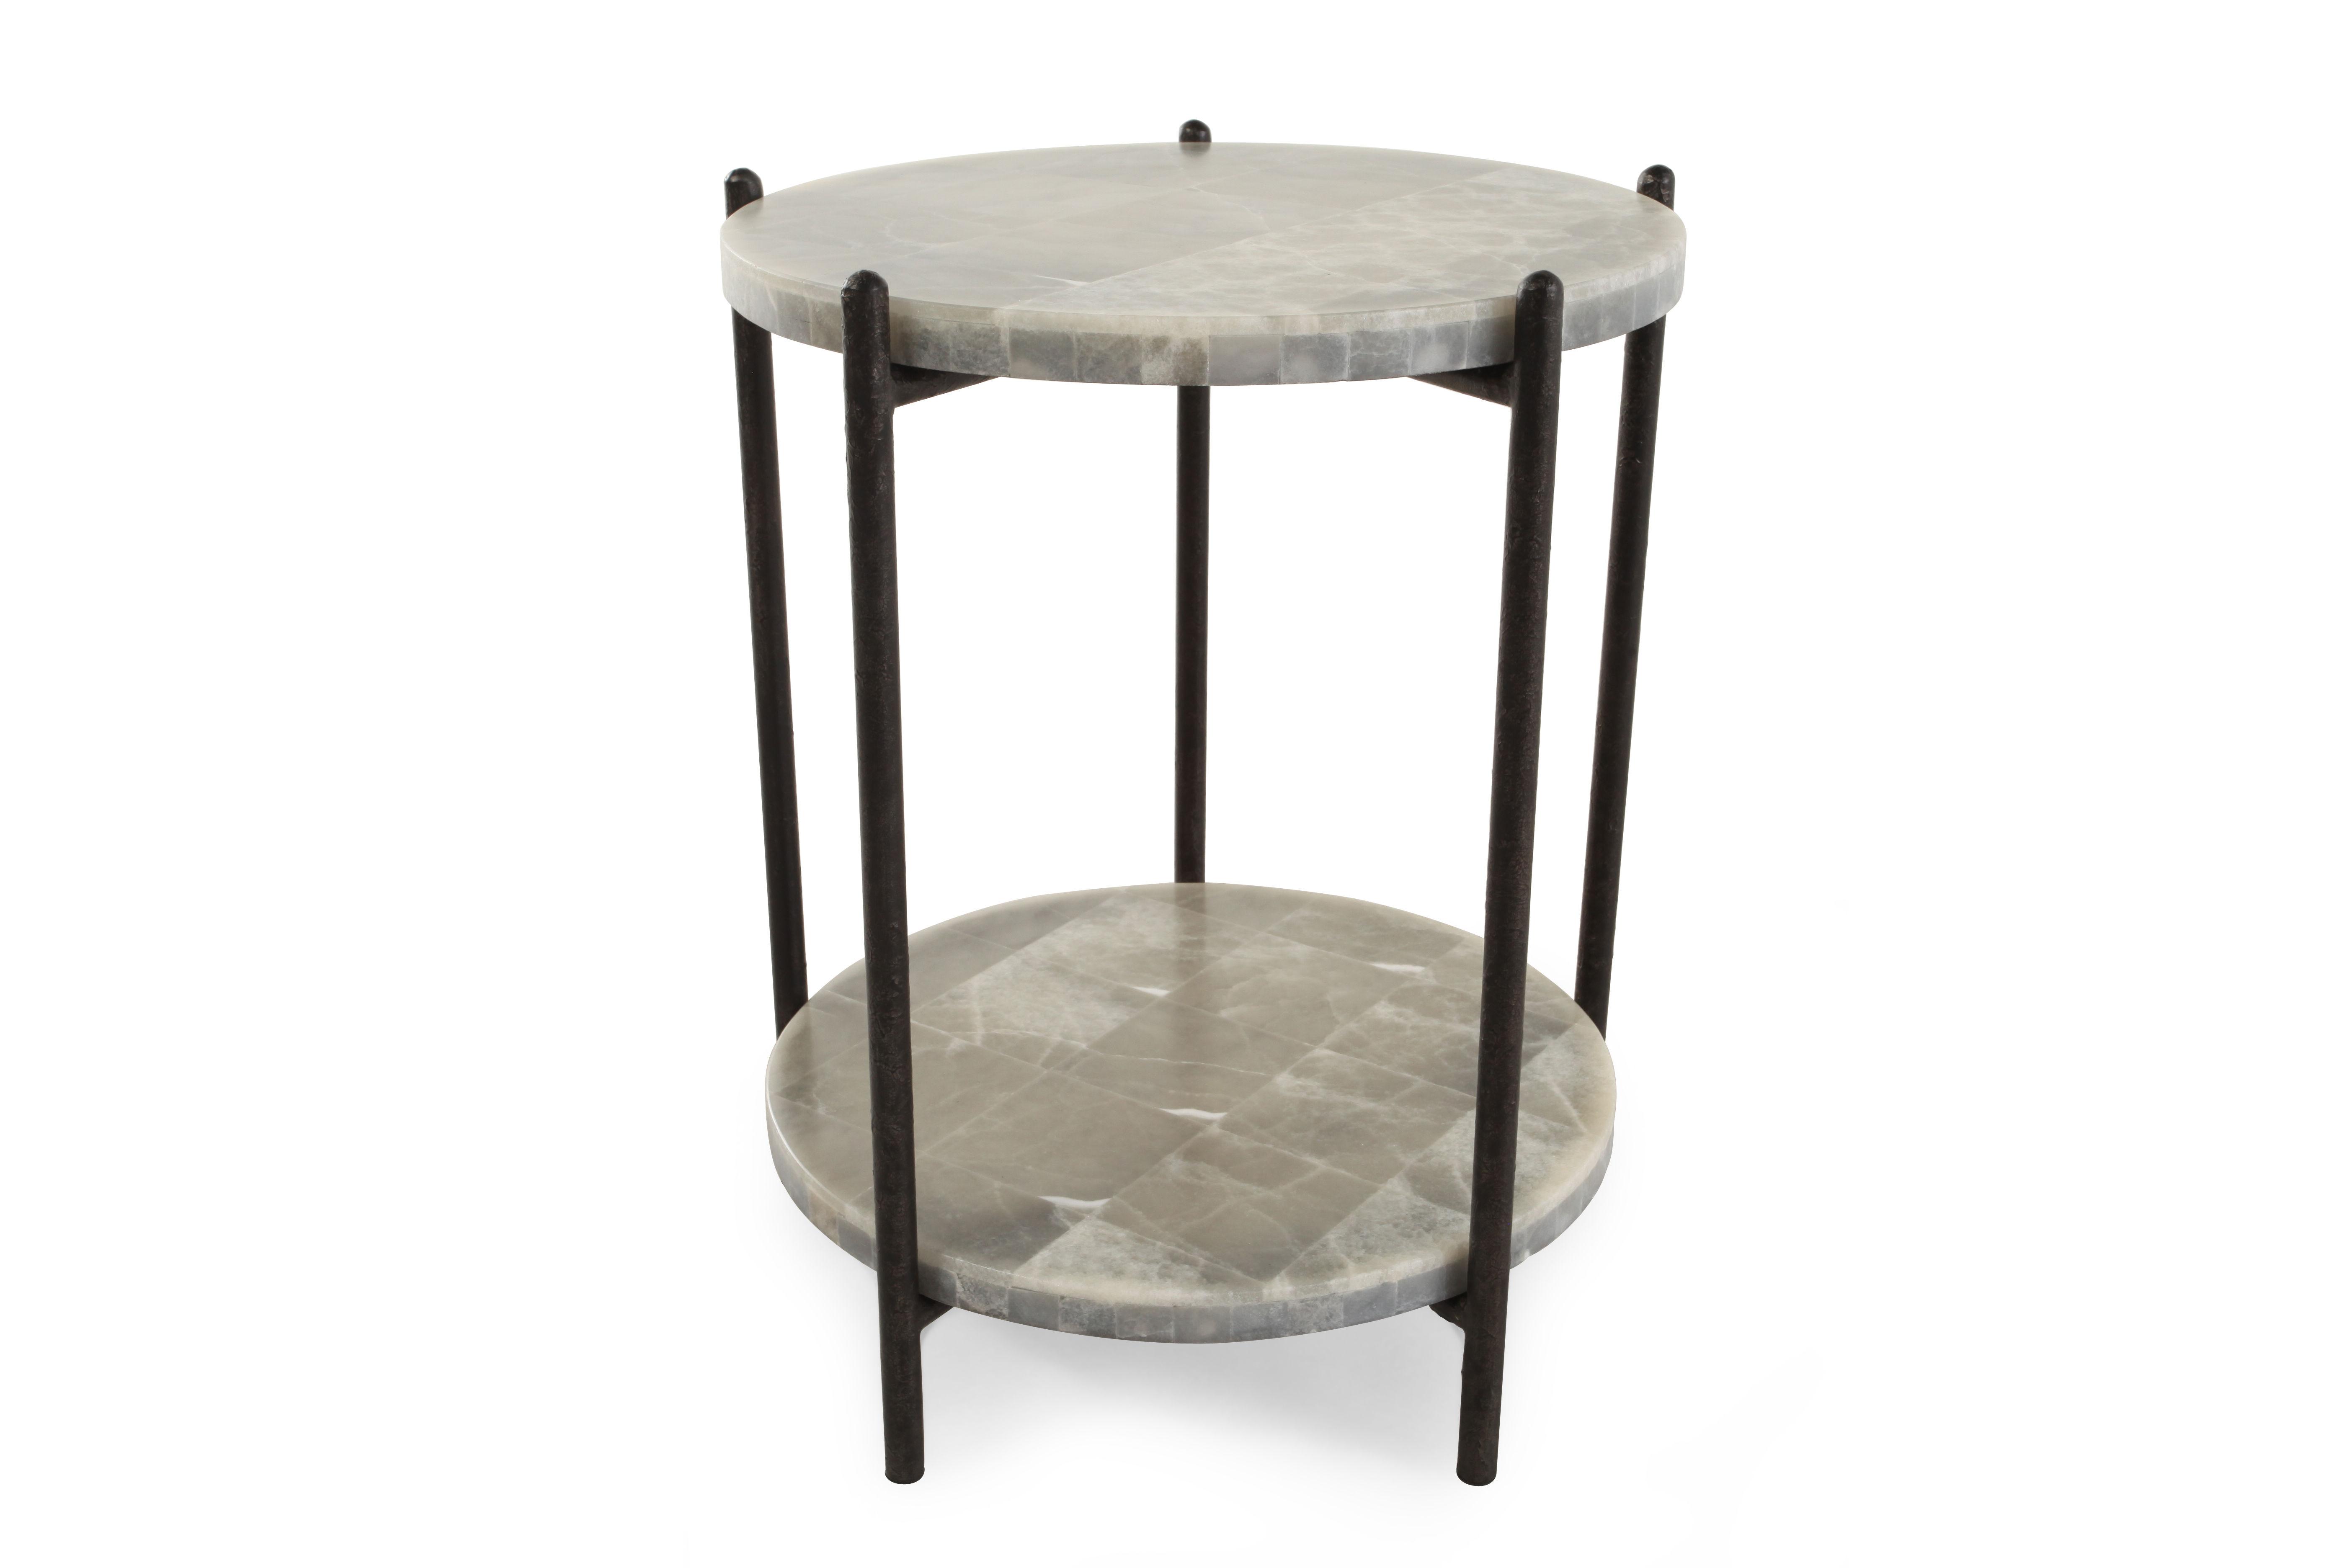 white accent table round antique small template compassion info pedestal distressed garage cabinets bar height decorative tablecloths lawn chair cushions home decorators catalog